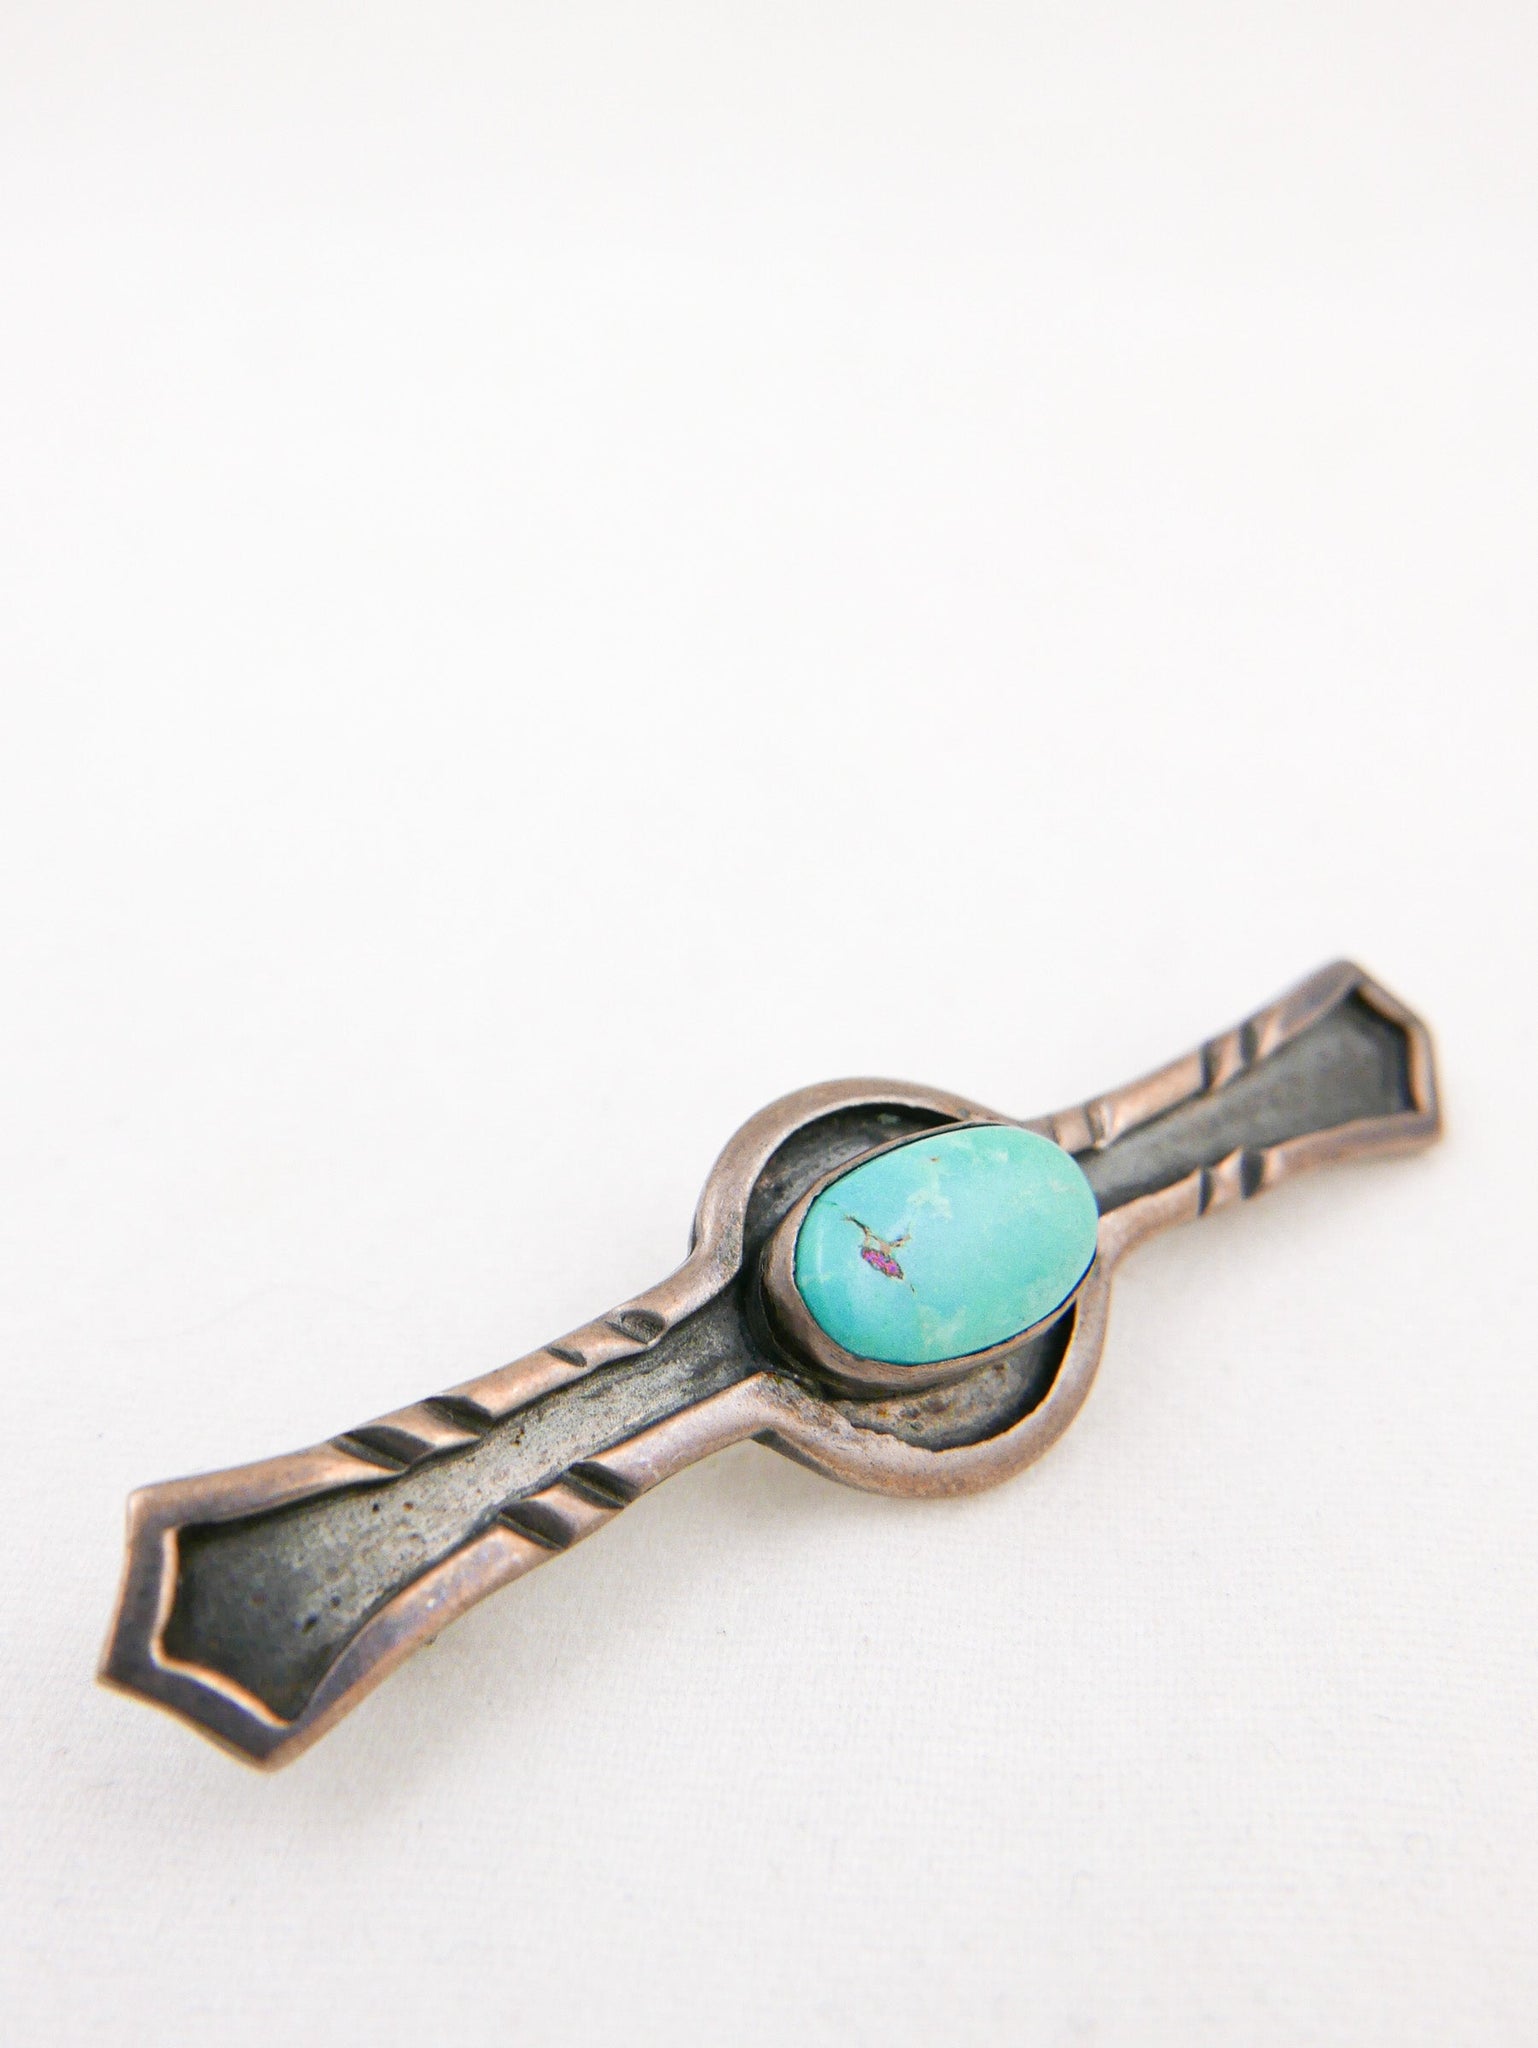 Sterling & Turquoise Bow Tie Pin